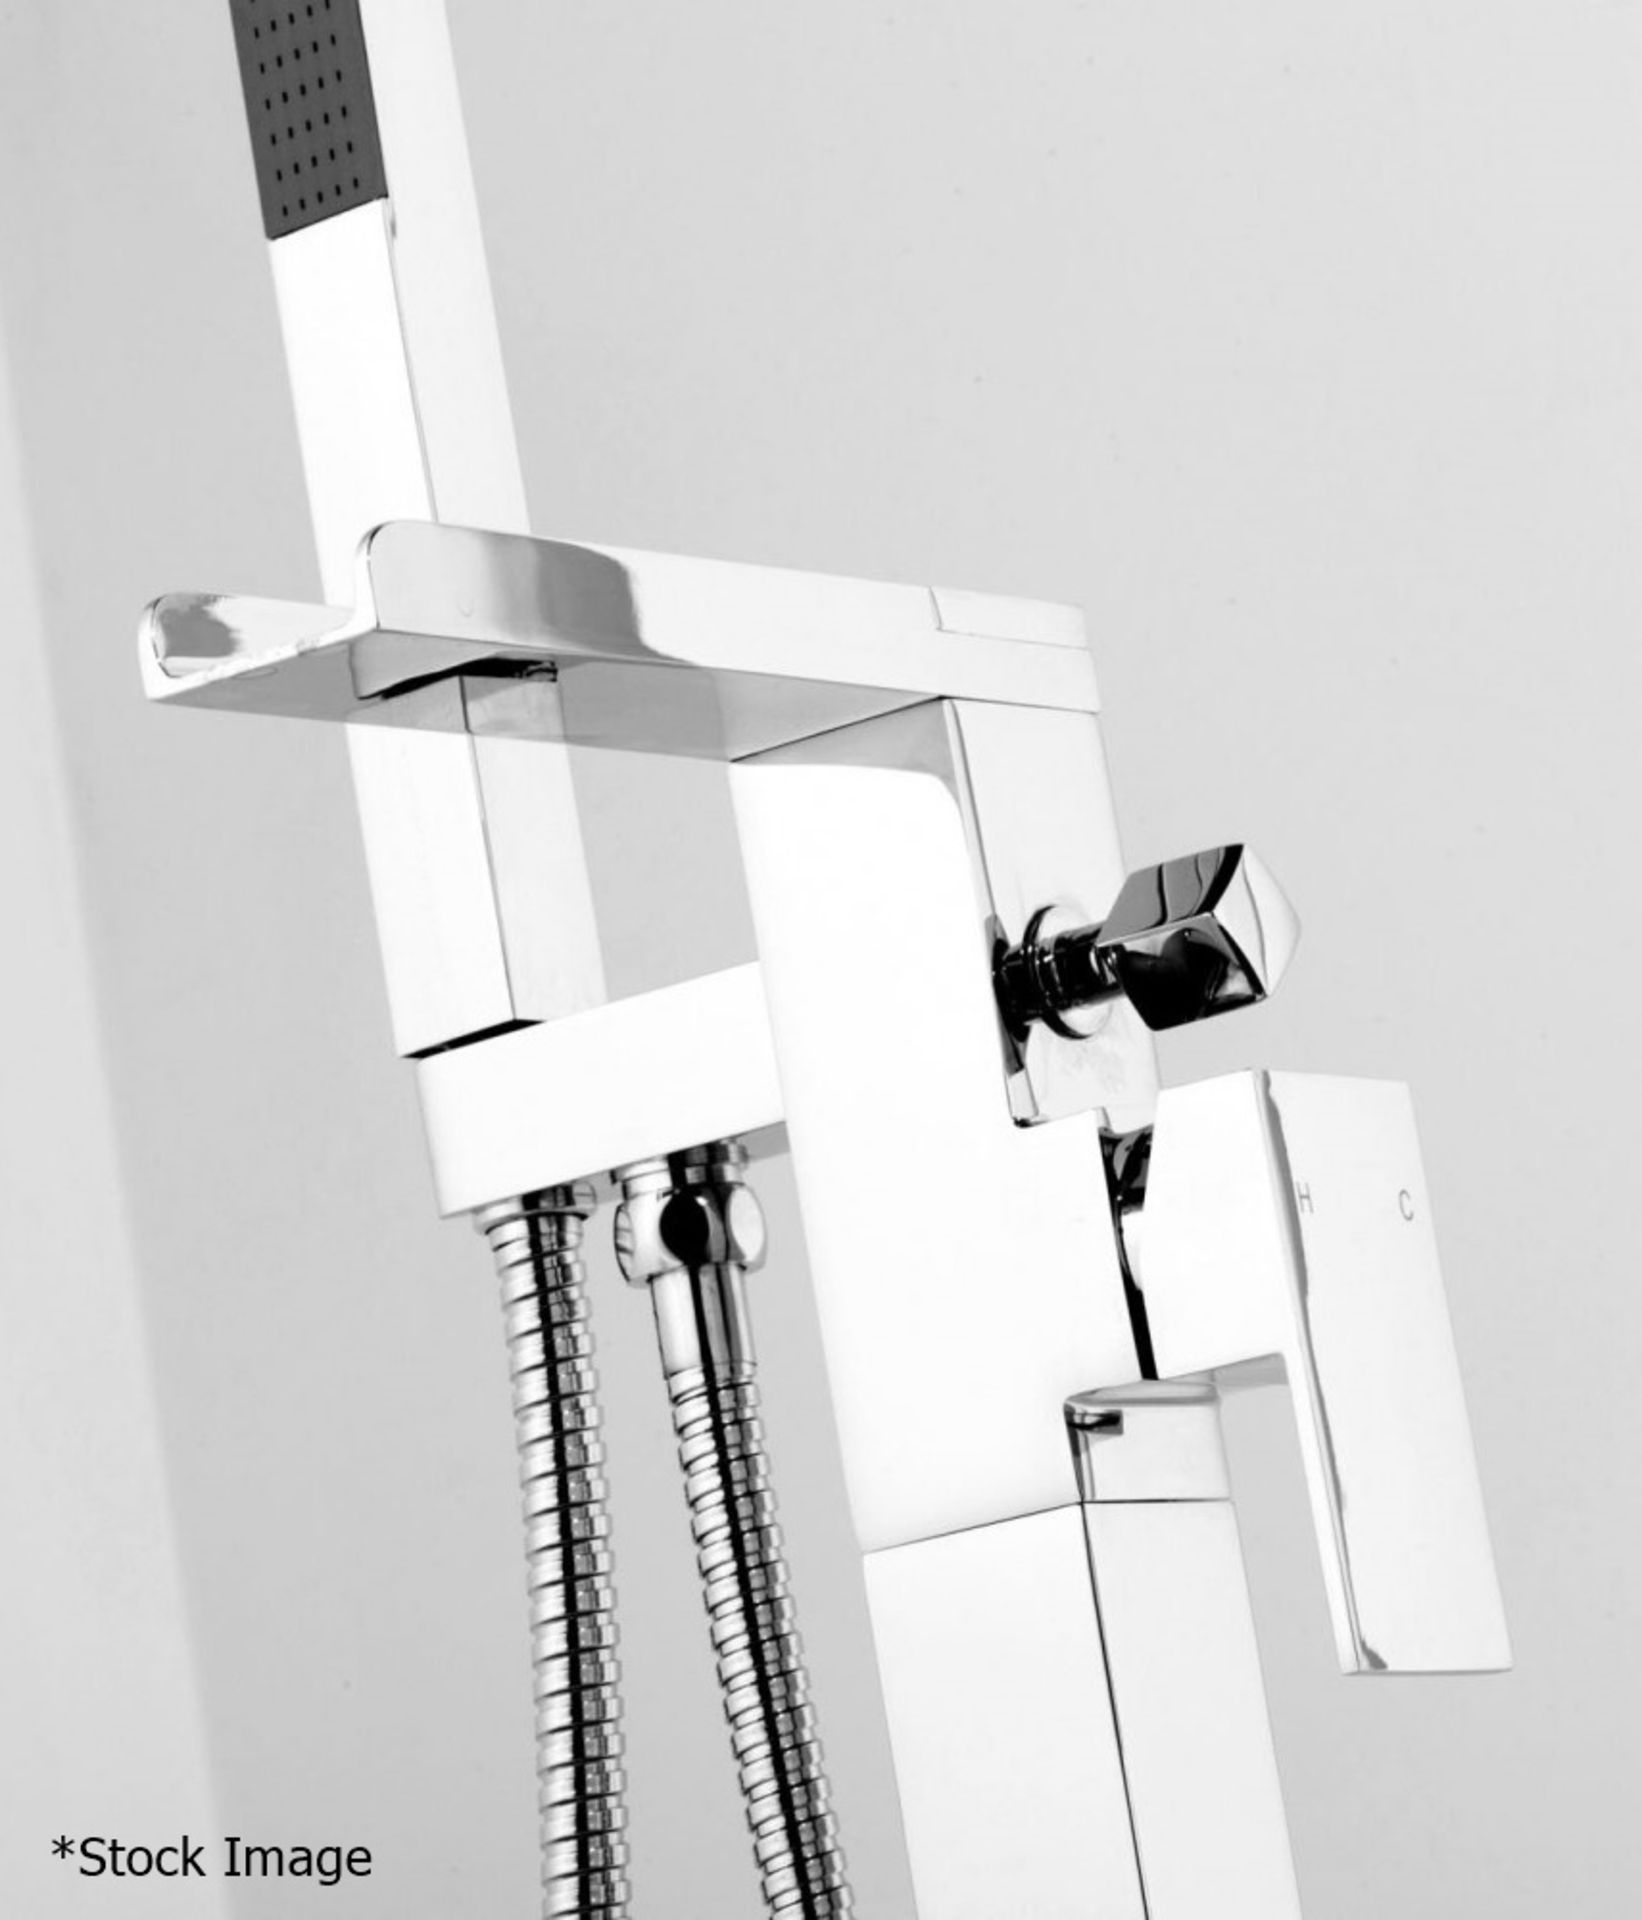 1 x 'Dunk' Freestanding Bath Shower Mixer - Ref: CT001 - New & Boxed Stock - RRP £348.00 - CL088 - - Image 2 of 3